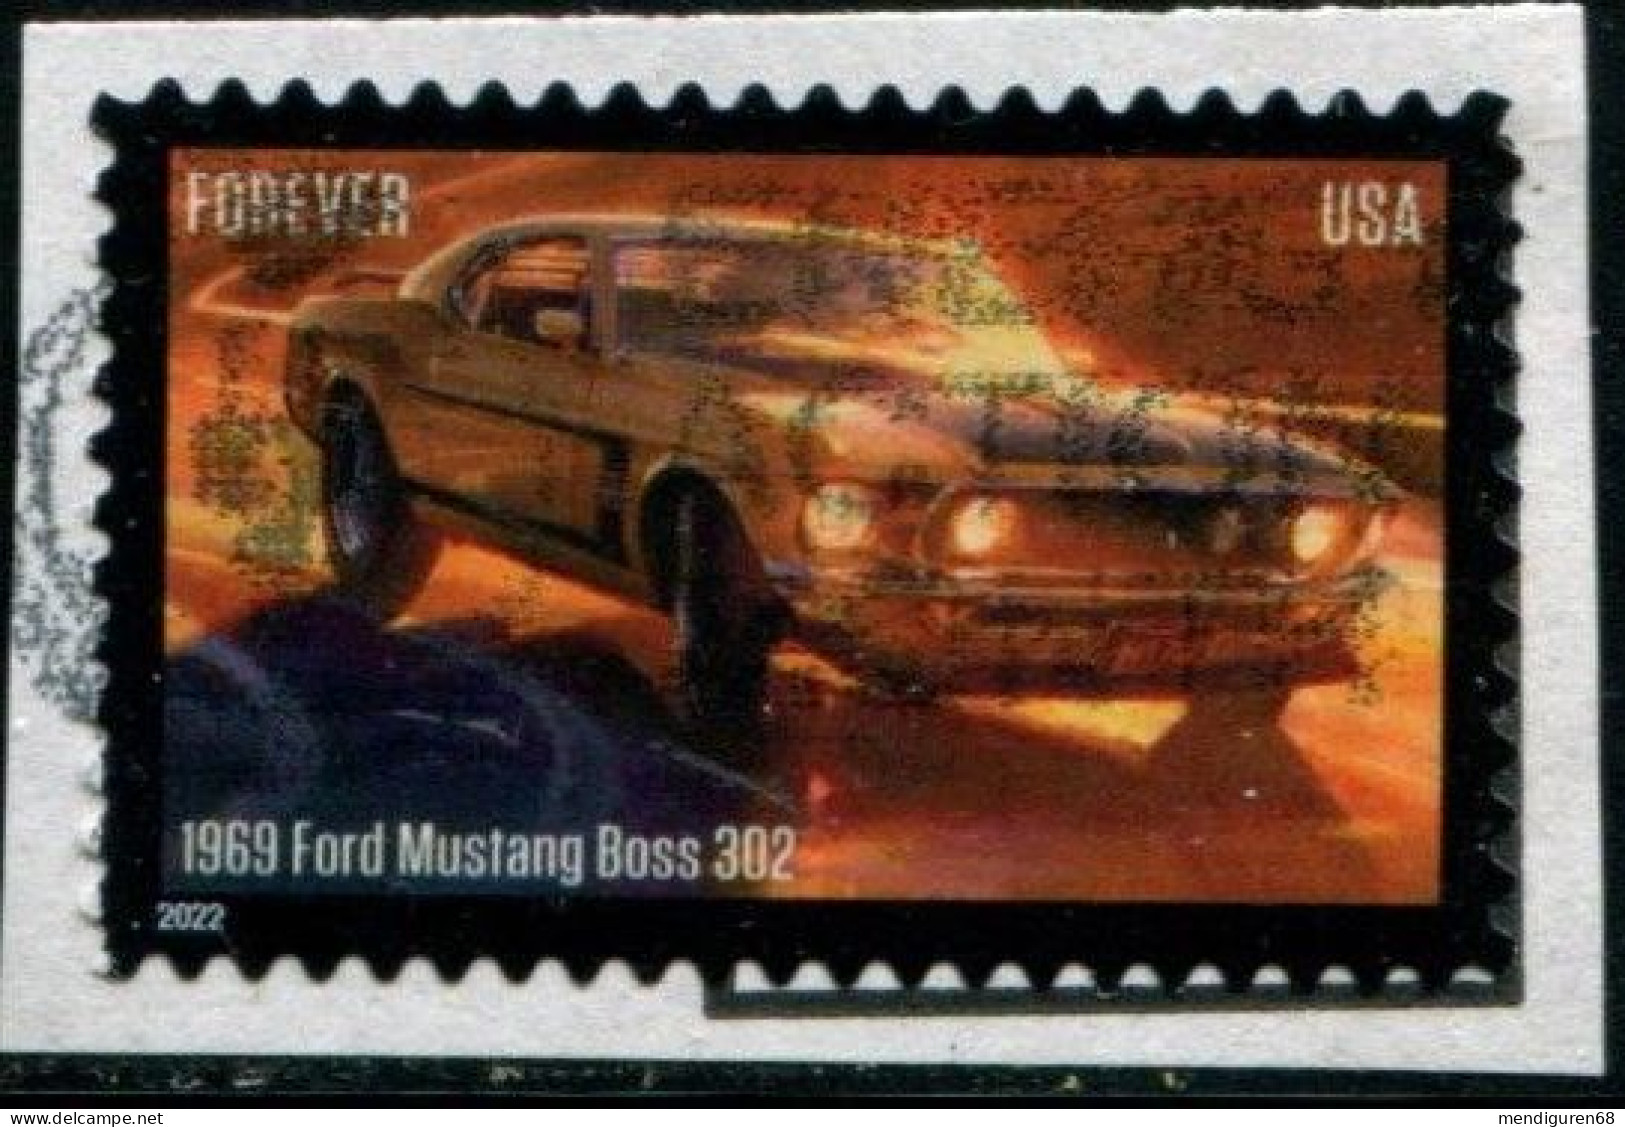 VEREINIGTE STAATEN ETATS UNIS USA 2022 PONY CARS: 1969 FORD MUSTANG BOSS 302 USED ON PAPER SN 5715 - Used Stamps